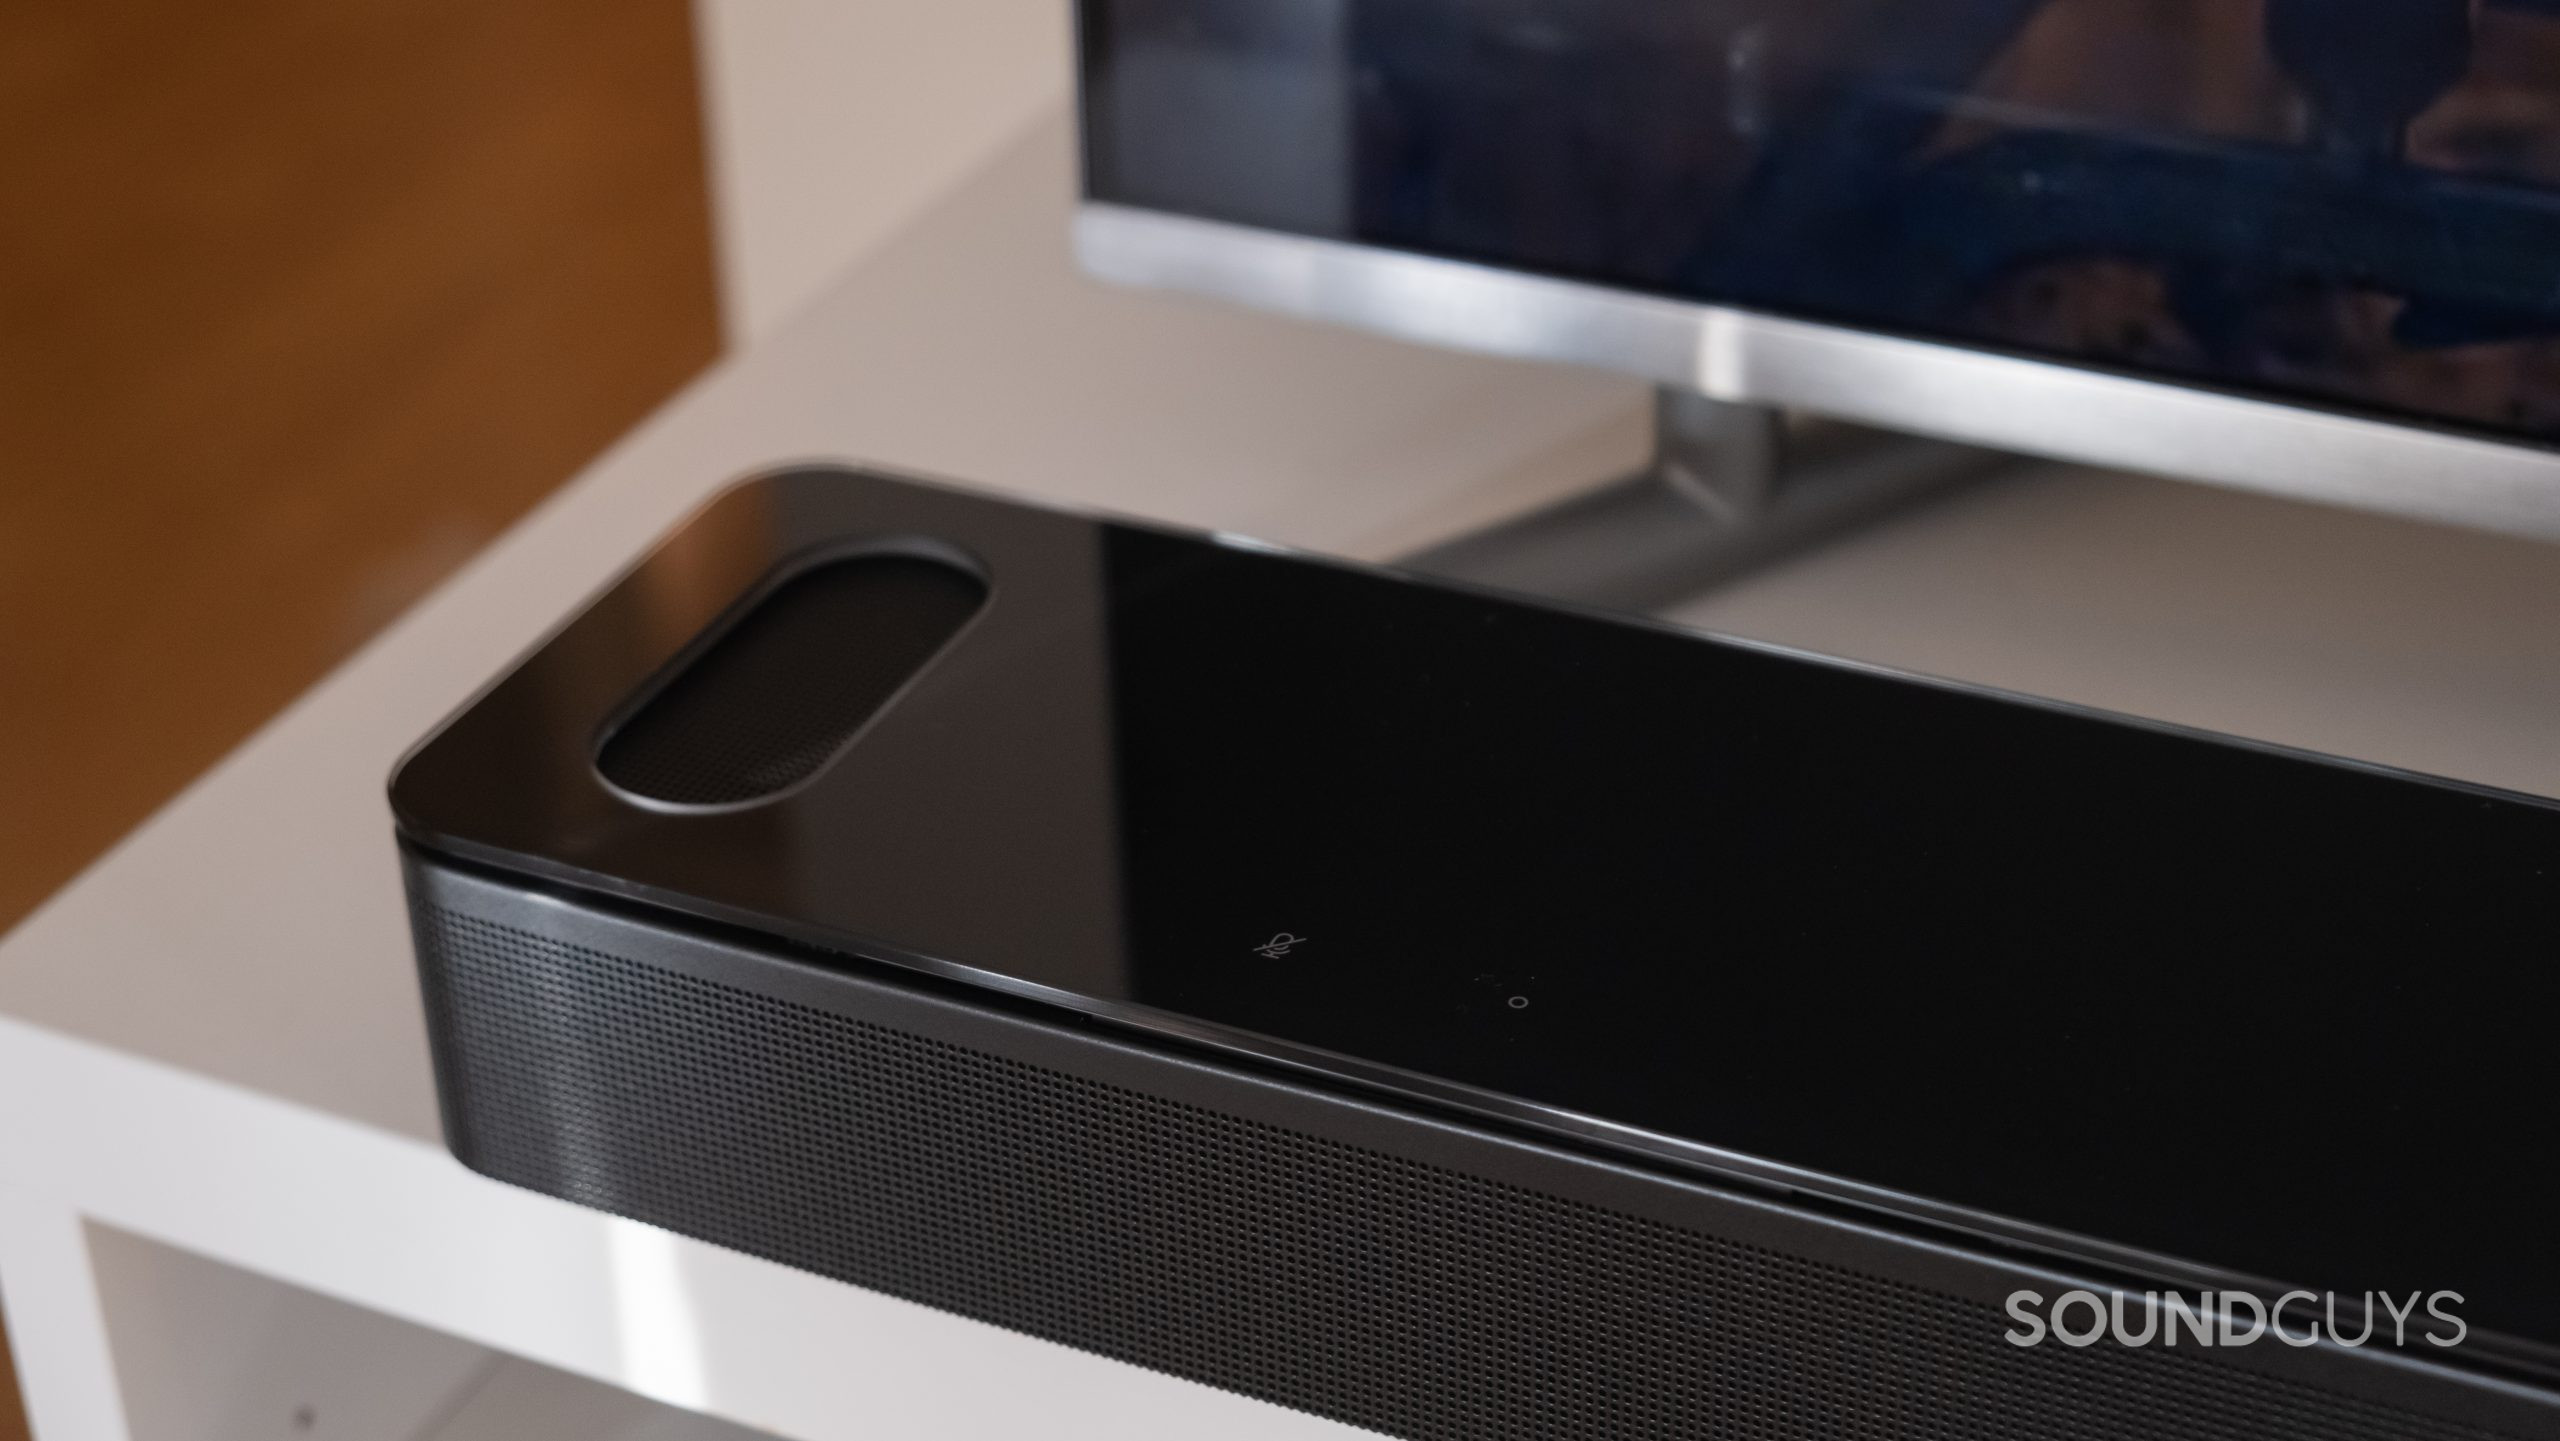 A close up of the Bose Smart Soundbar 900 on a TV stand with a TV in the background, showing the upfiring speaker.